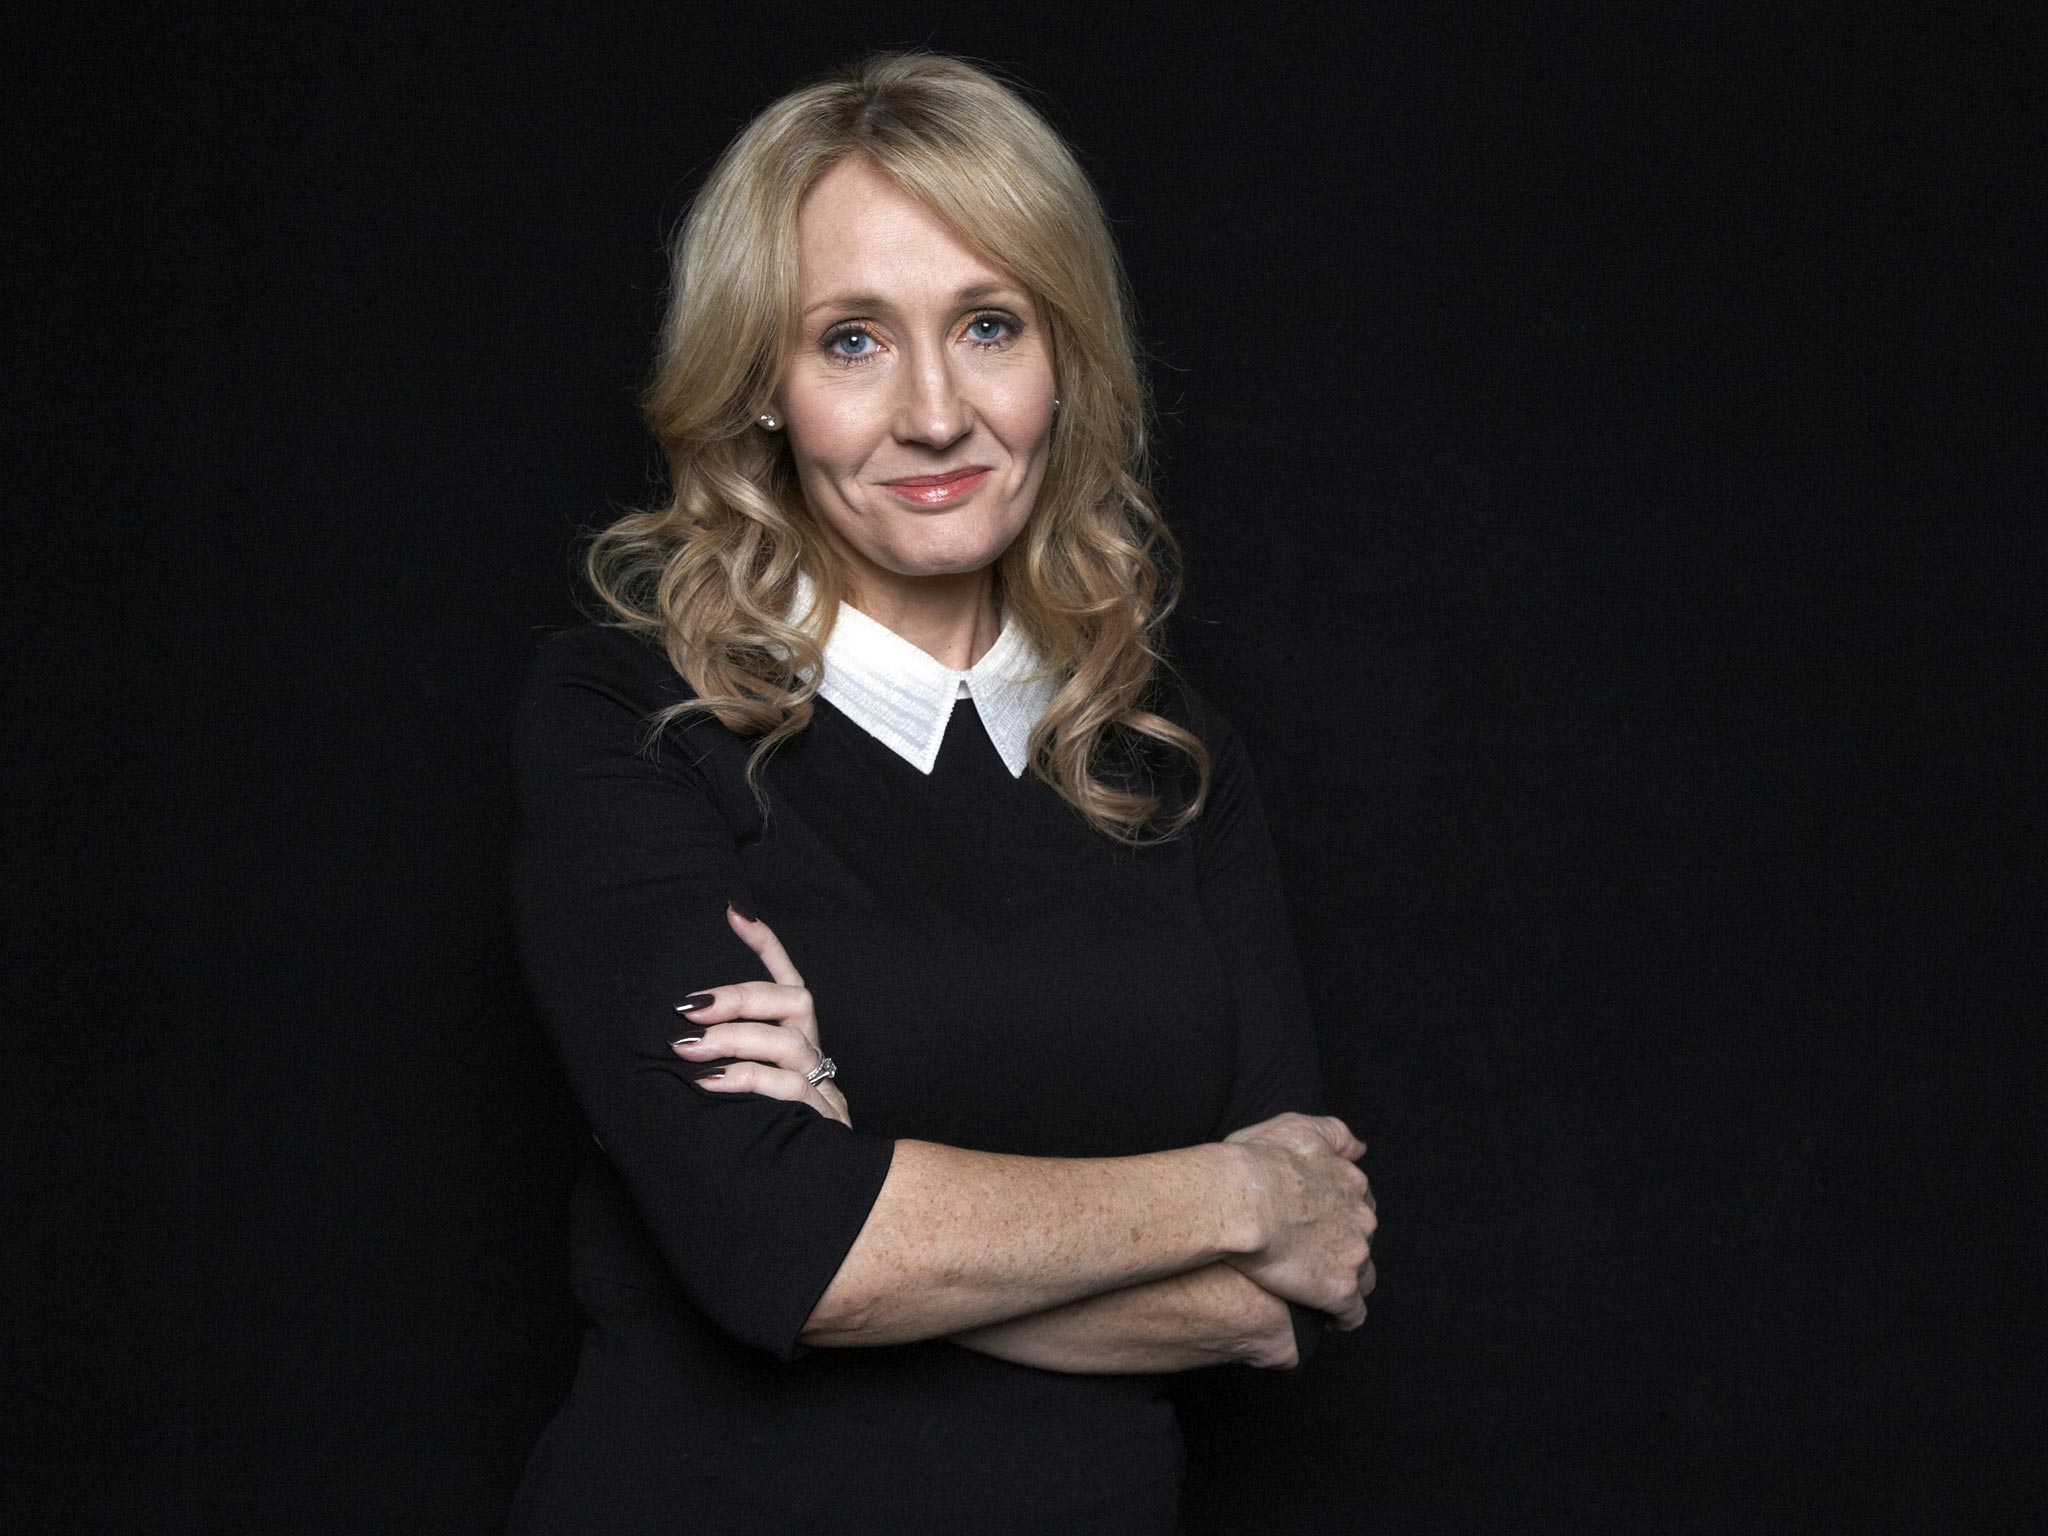 JK Rowling has donated £1million to the Better Together campaign